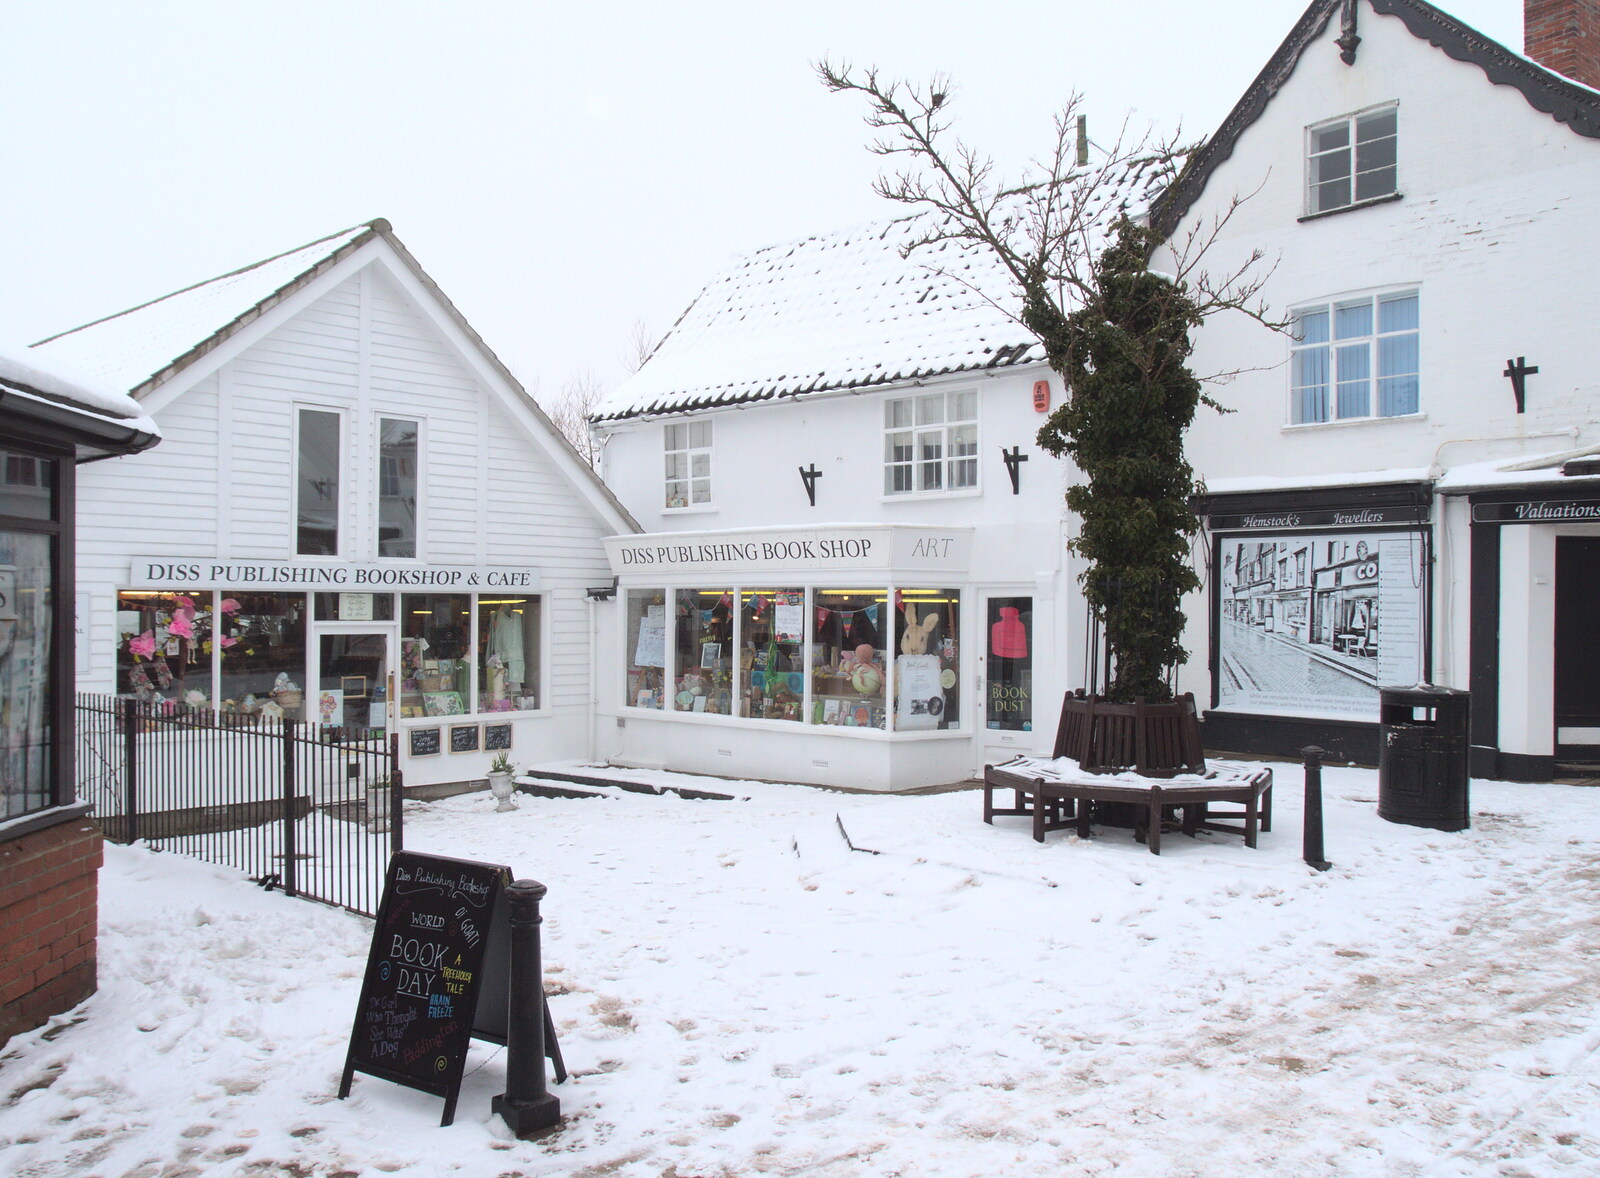 Diss Publishing bookshop from More March Snow and a Postcard from Diss, Norfolk - 3rd March 2018